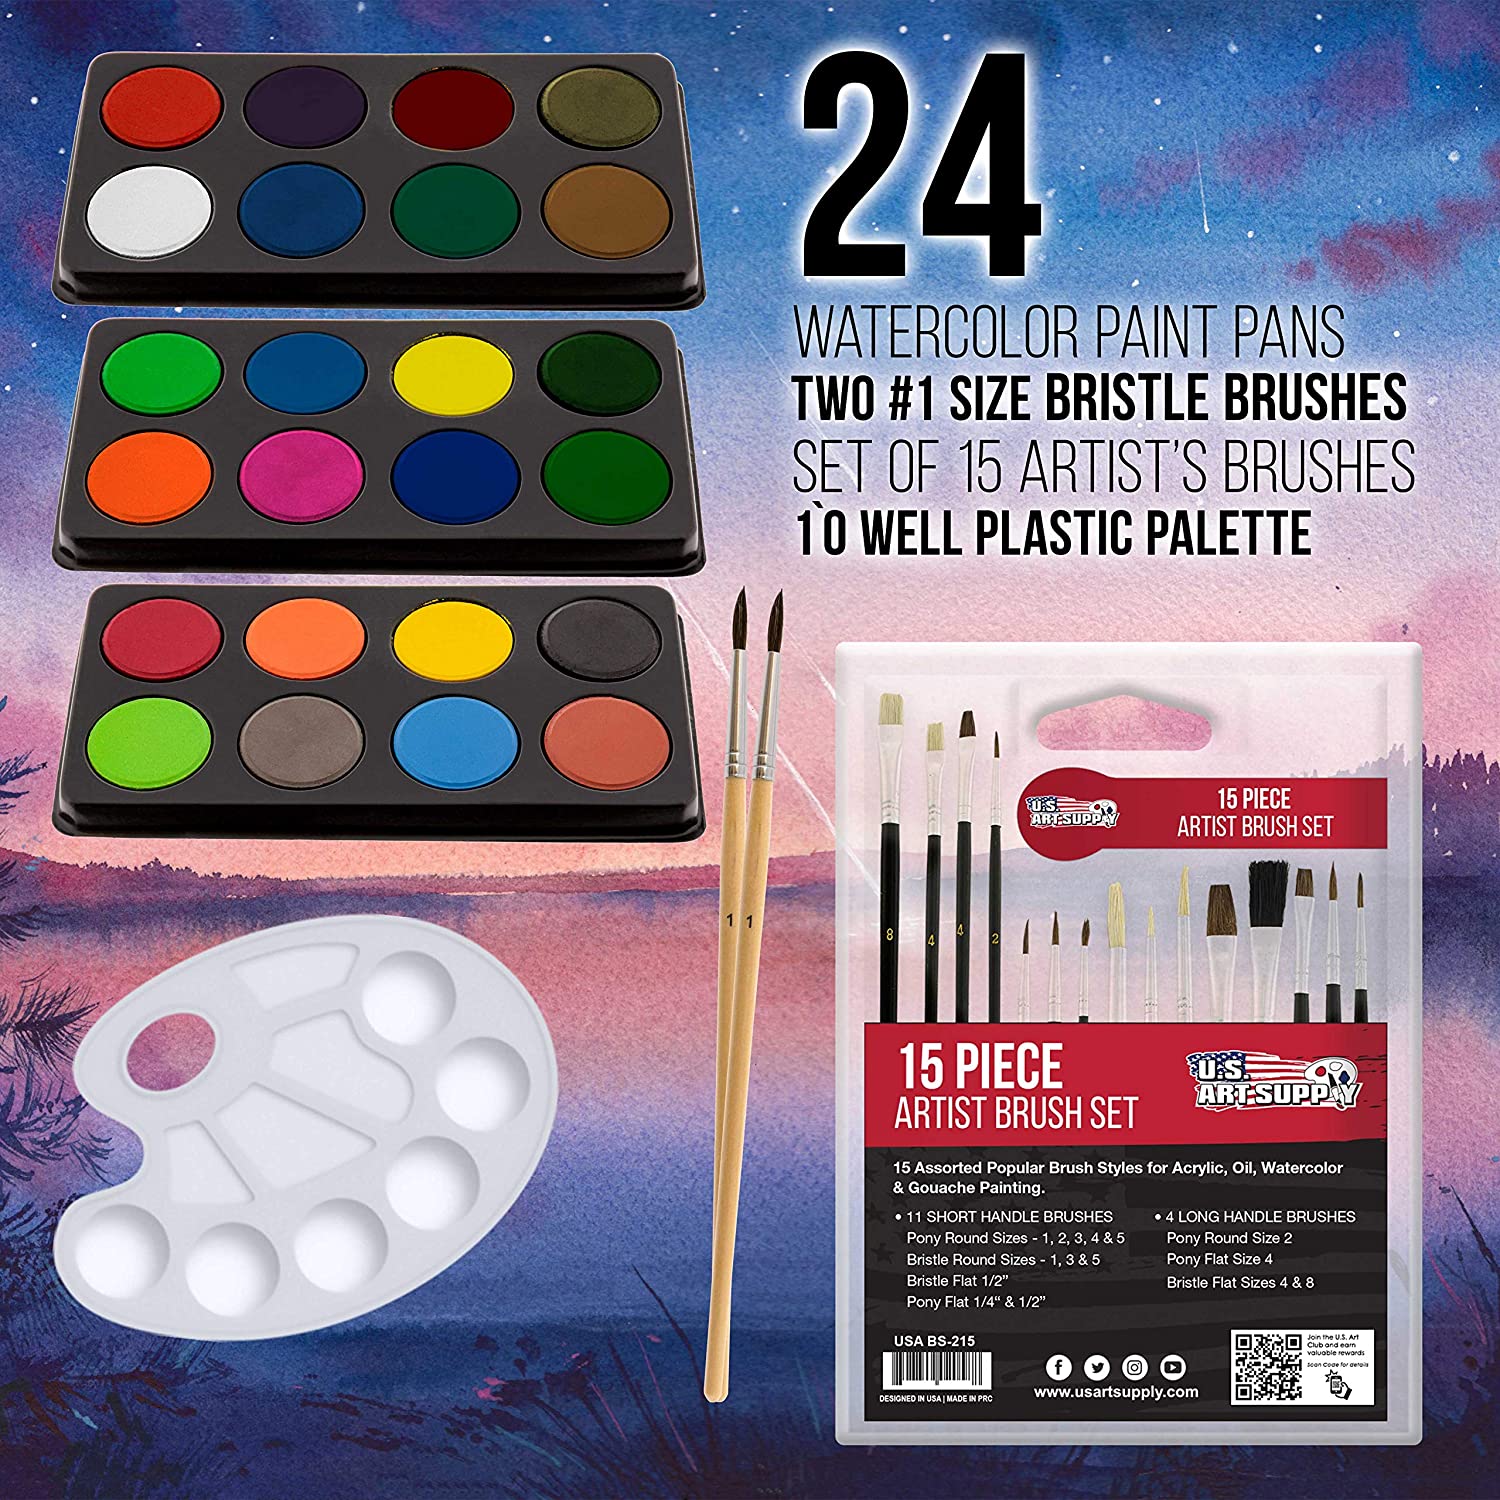 A number of different colored paint palettes along with some artist brushes. The text reads, '24 watercolor paint pans. Two #1 bristle brushes. Set of 15 artist's brushes. 10 well plastic palette.'